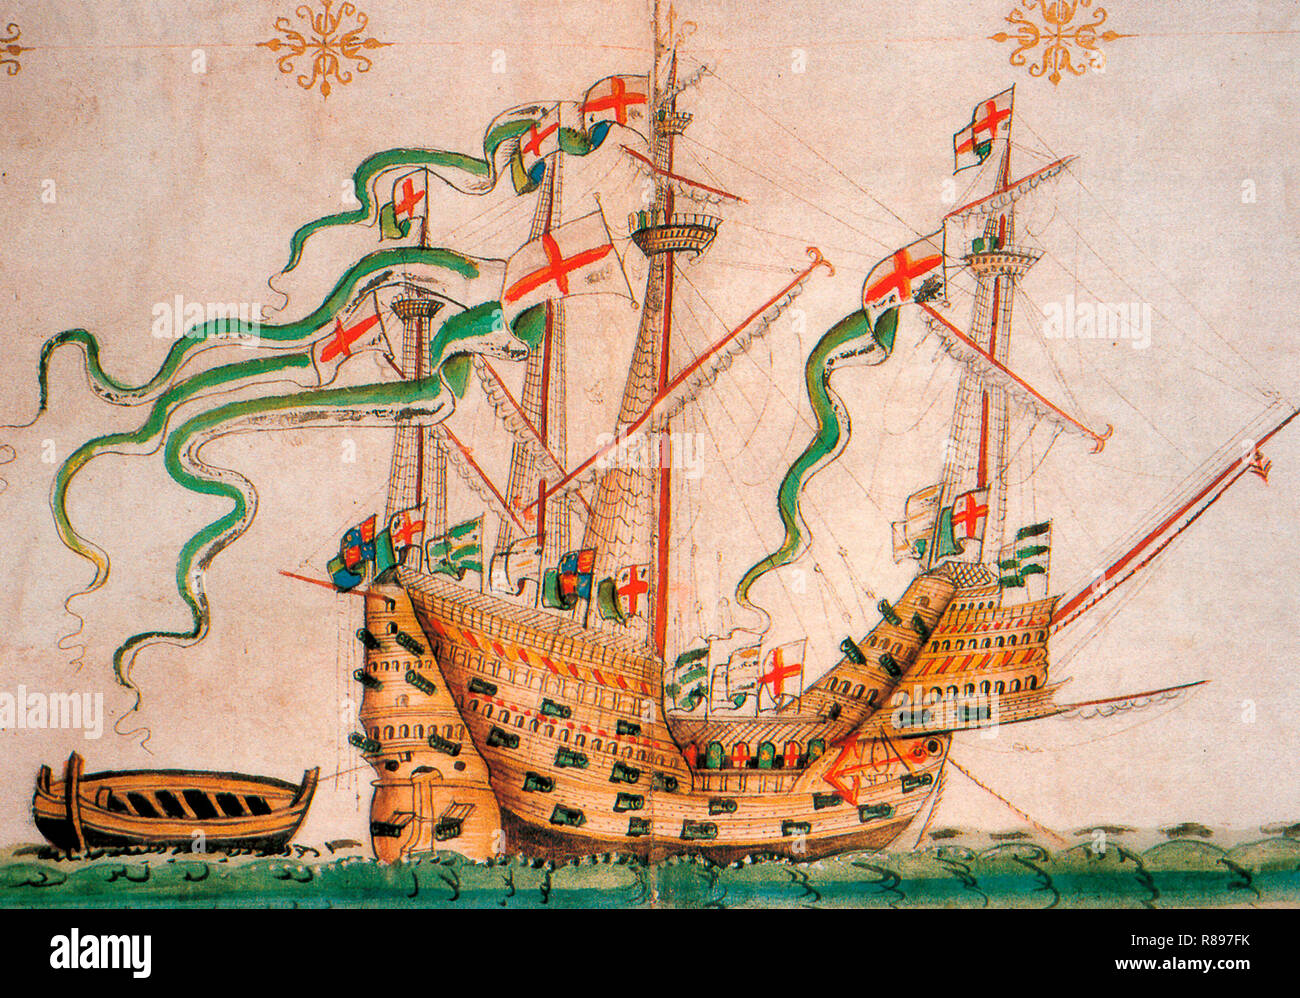 Illustration of the carrack Peter Pomegranate, also known as the Peter. Stock Photo